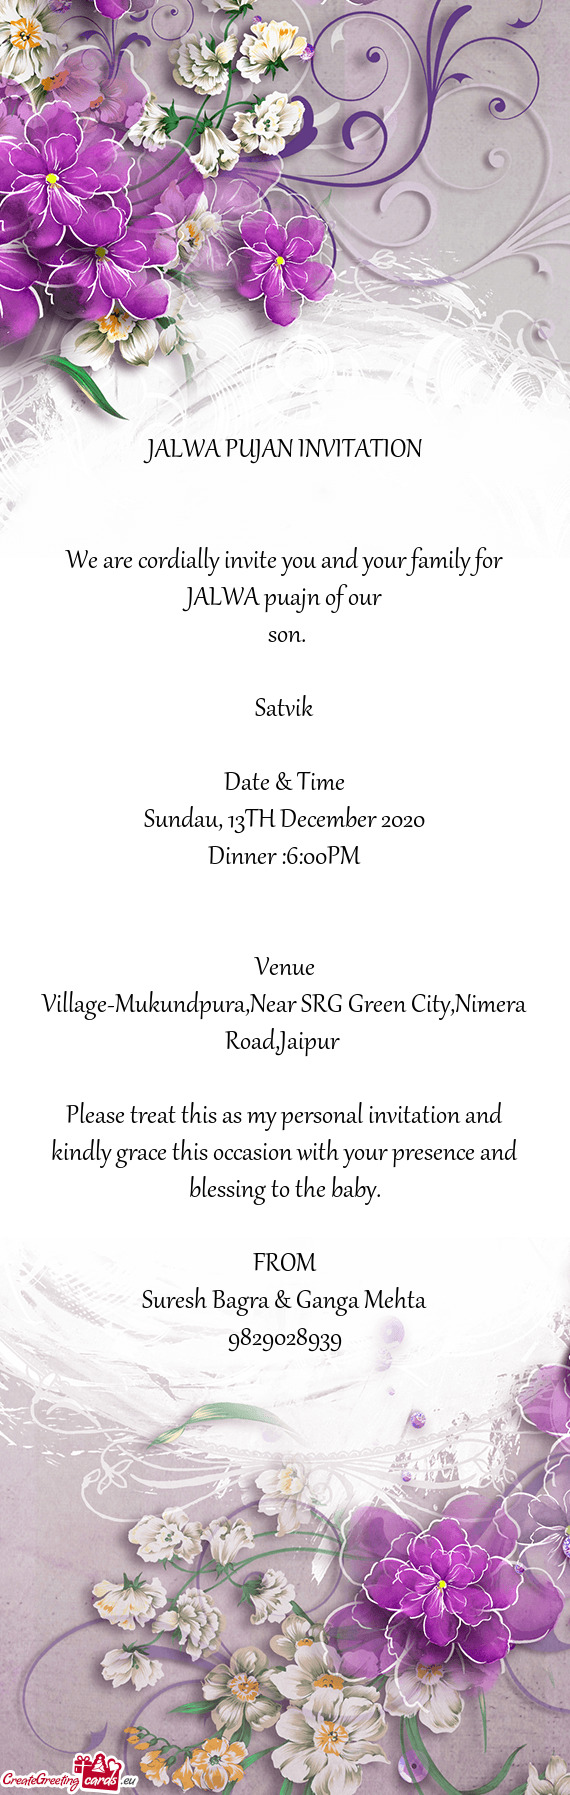 We are cordially invite you and your family for JALWA puajn of our